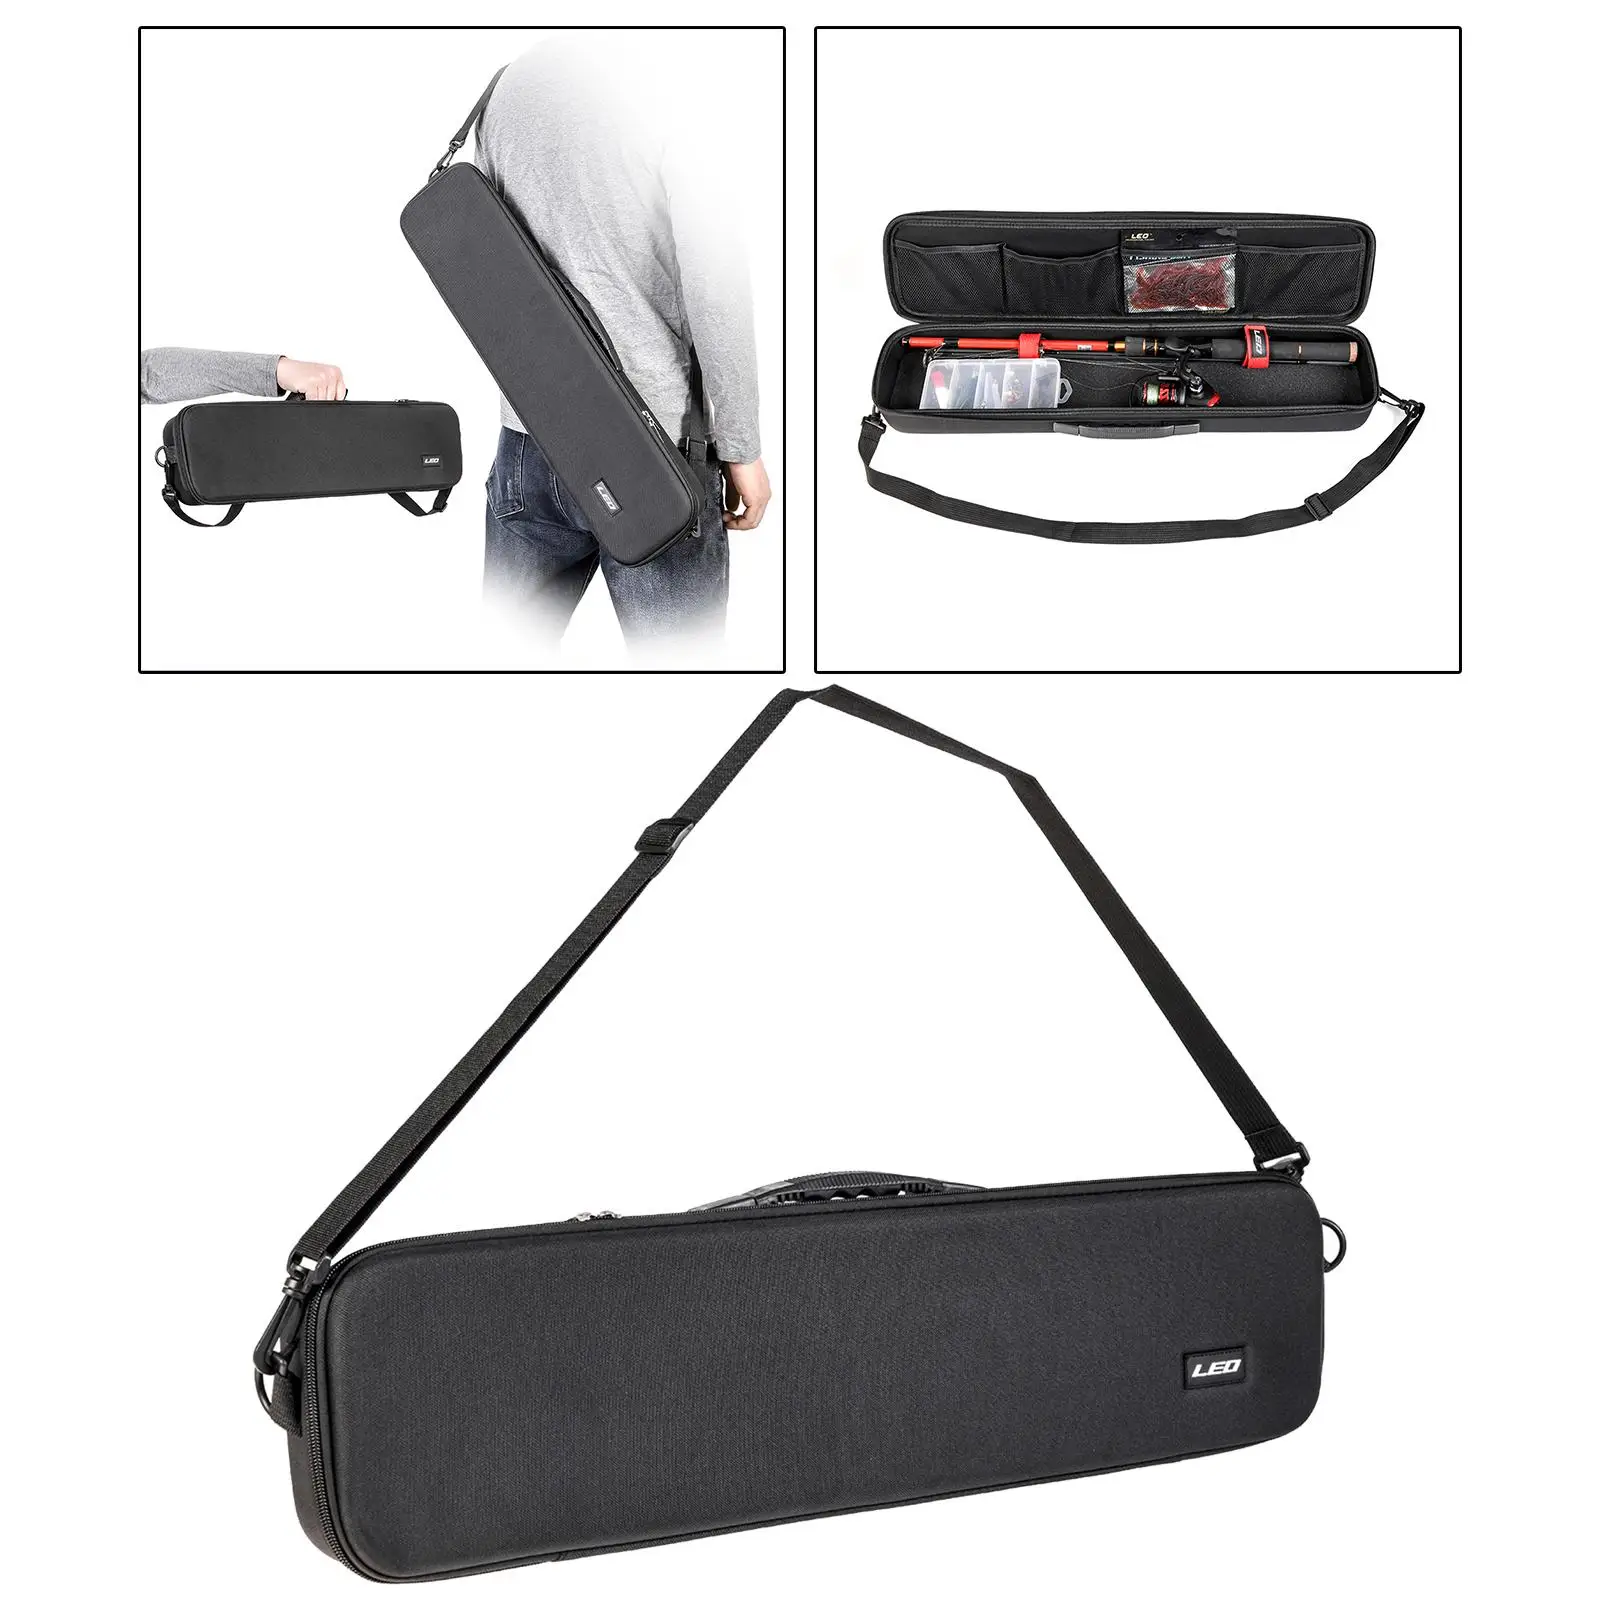 Fishing Rod Reel Case Hard Shell Case Portable with Strap Waterproof Storage Bag